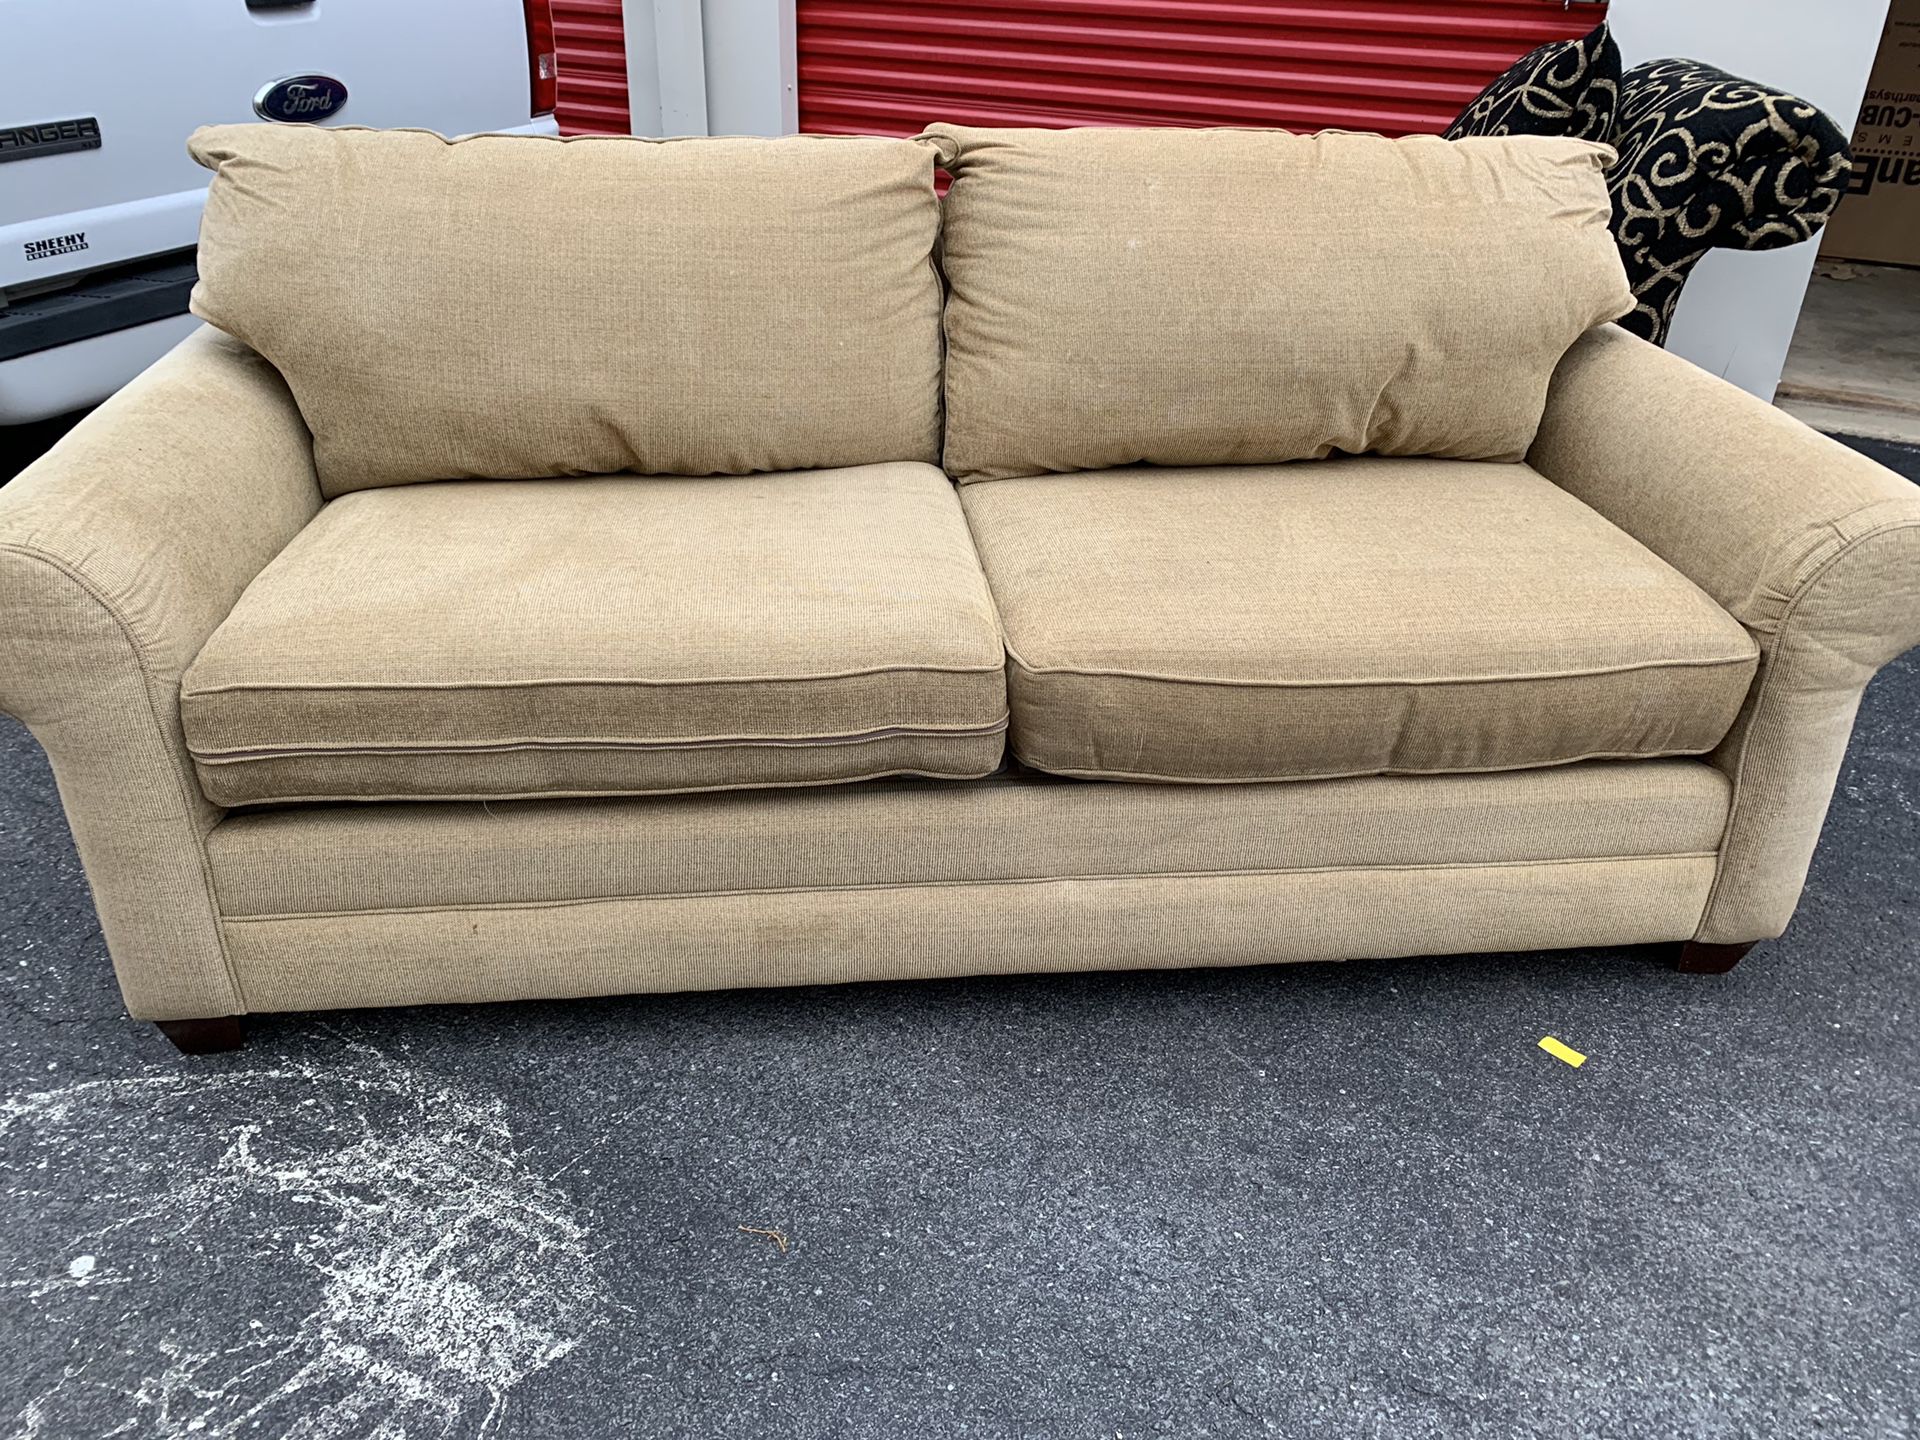 Beautiful 3 Seat Sofa By Basset Furniture Excellent Condition Tan